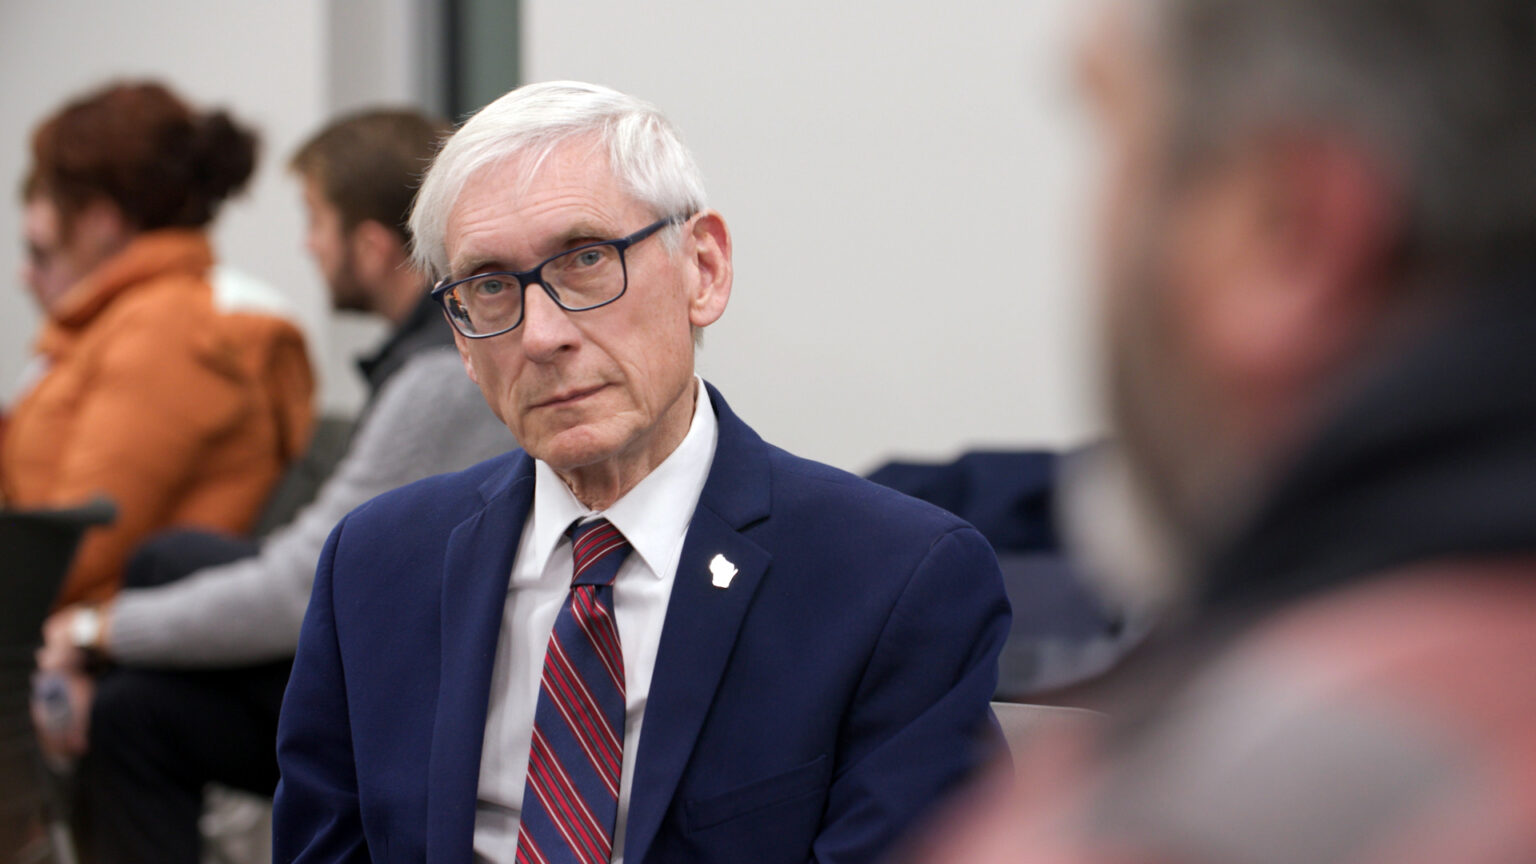 Tony Evers listens to another speaker while seated alongside others, with more people seated in the background.